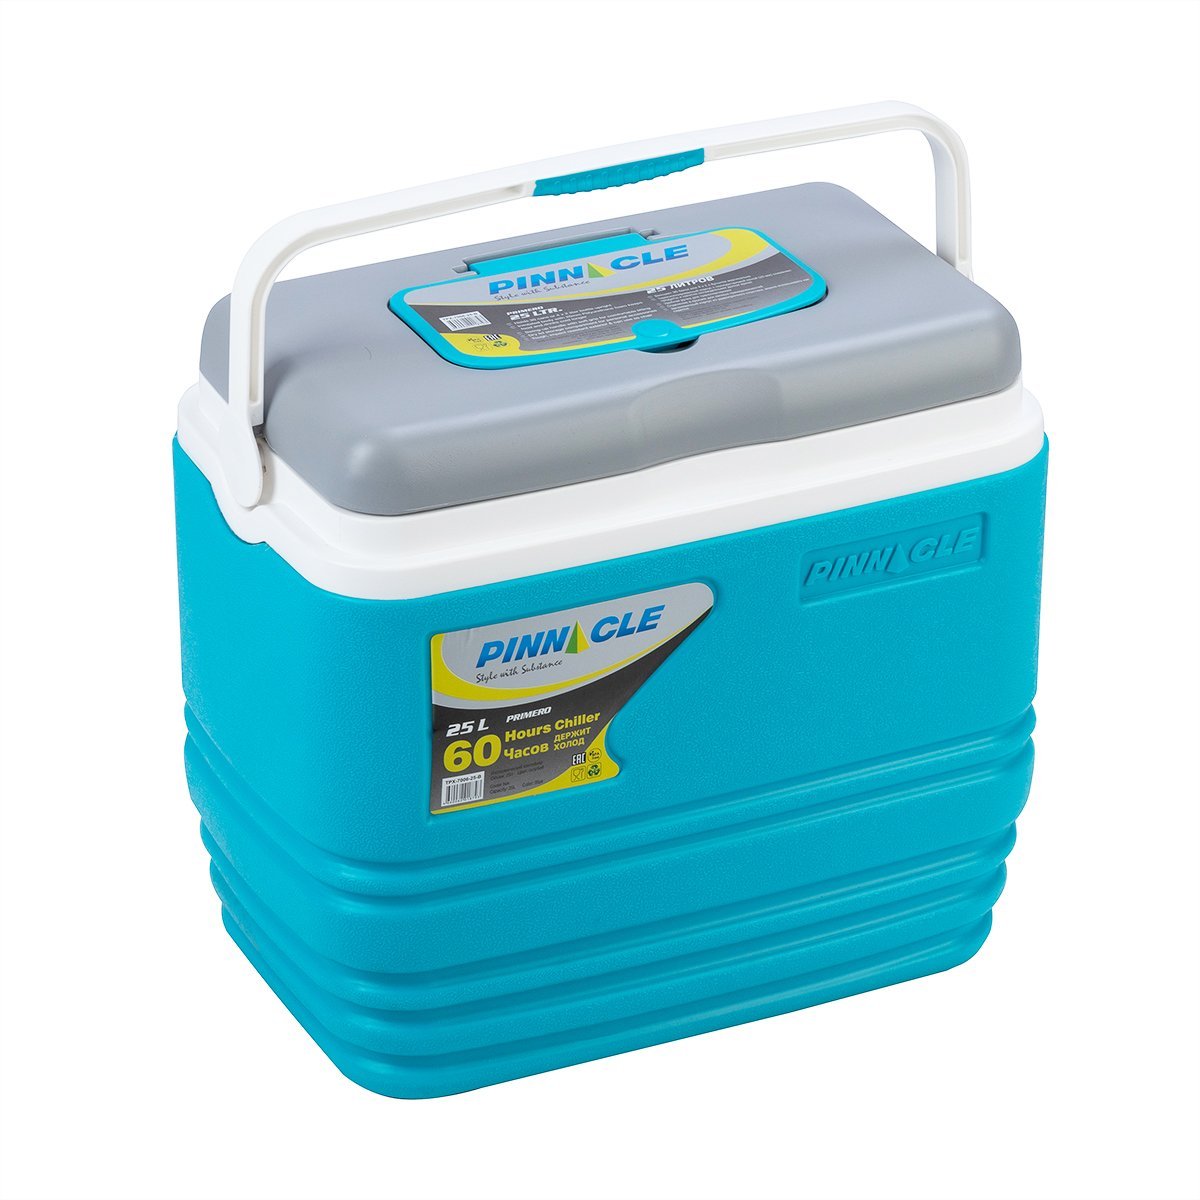 Primero Portable Camping Ice Chest with Lid Cup Holders, 26 qt, Blue